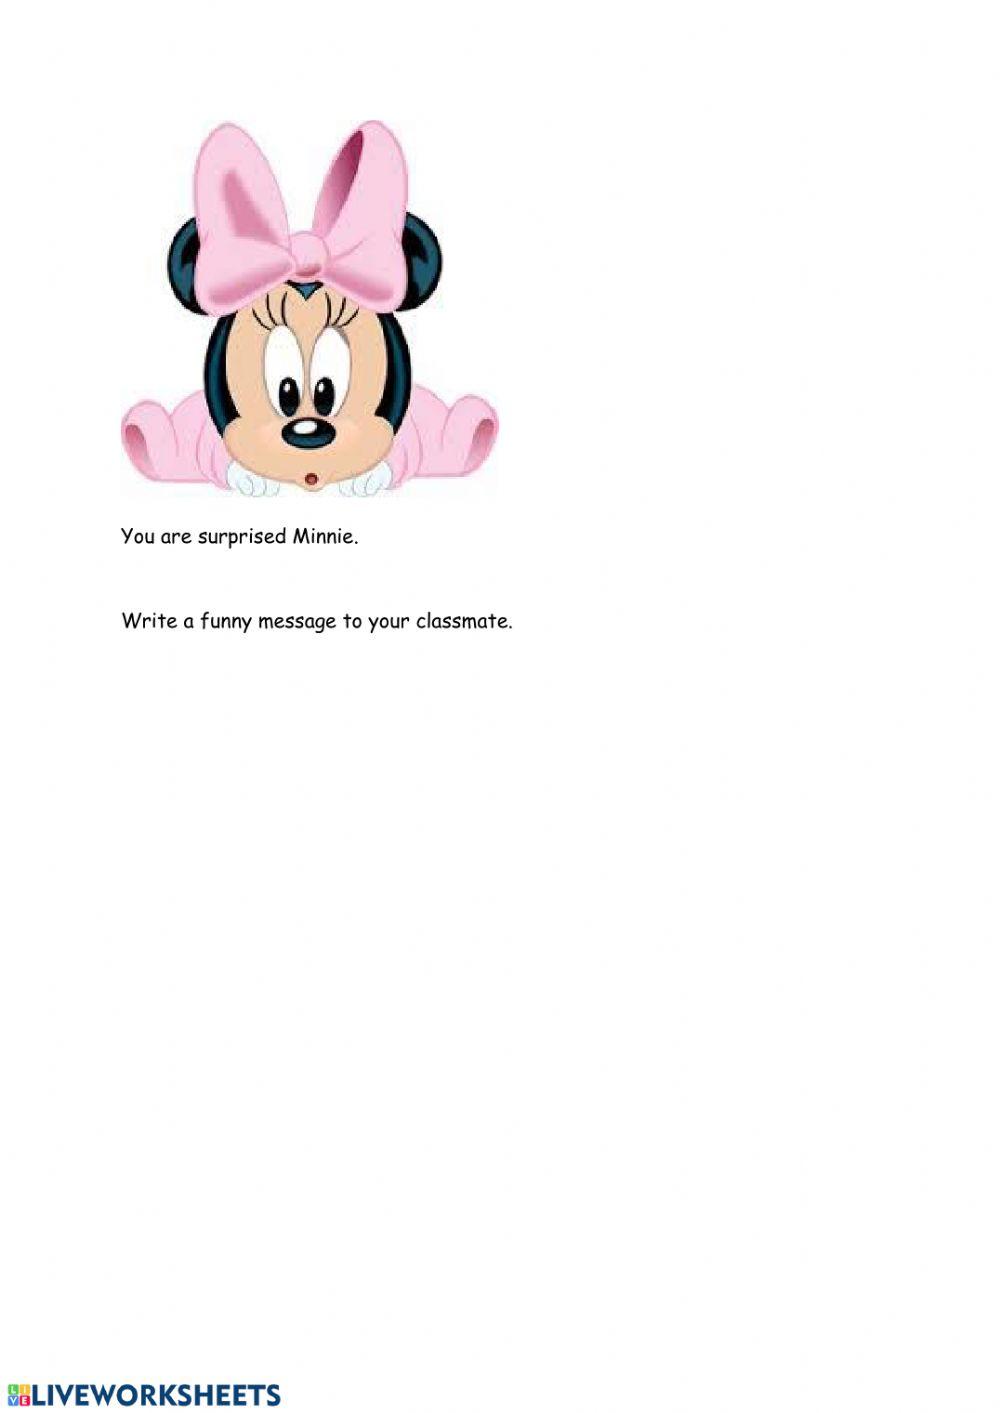 A message from Minnie